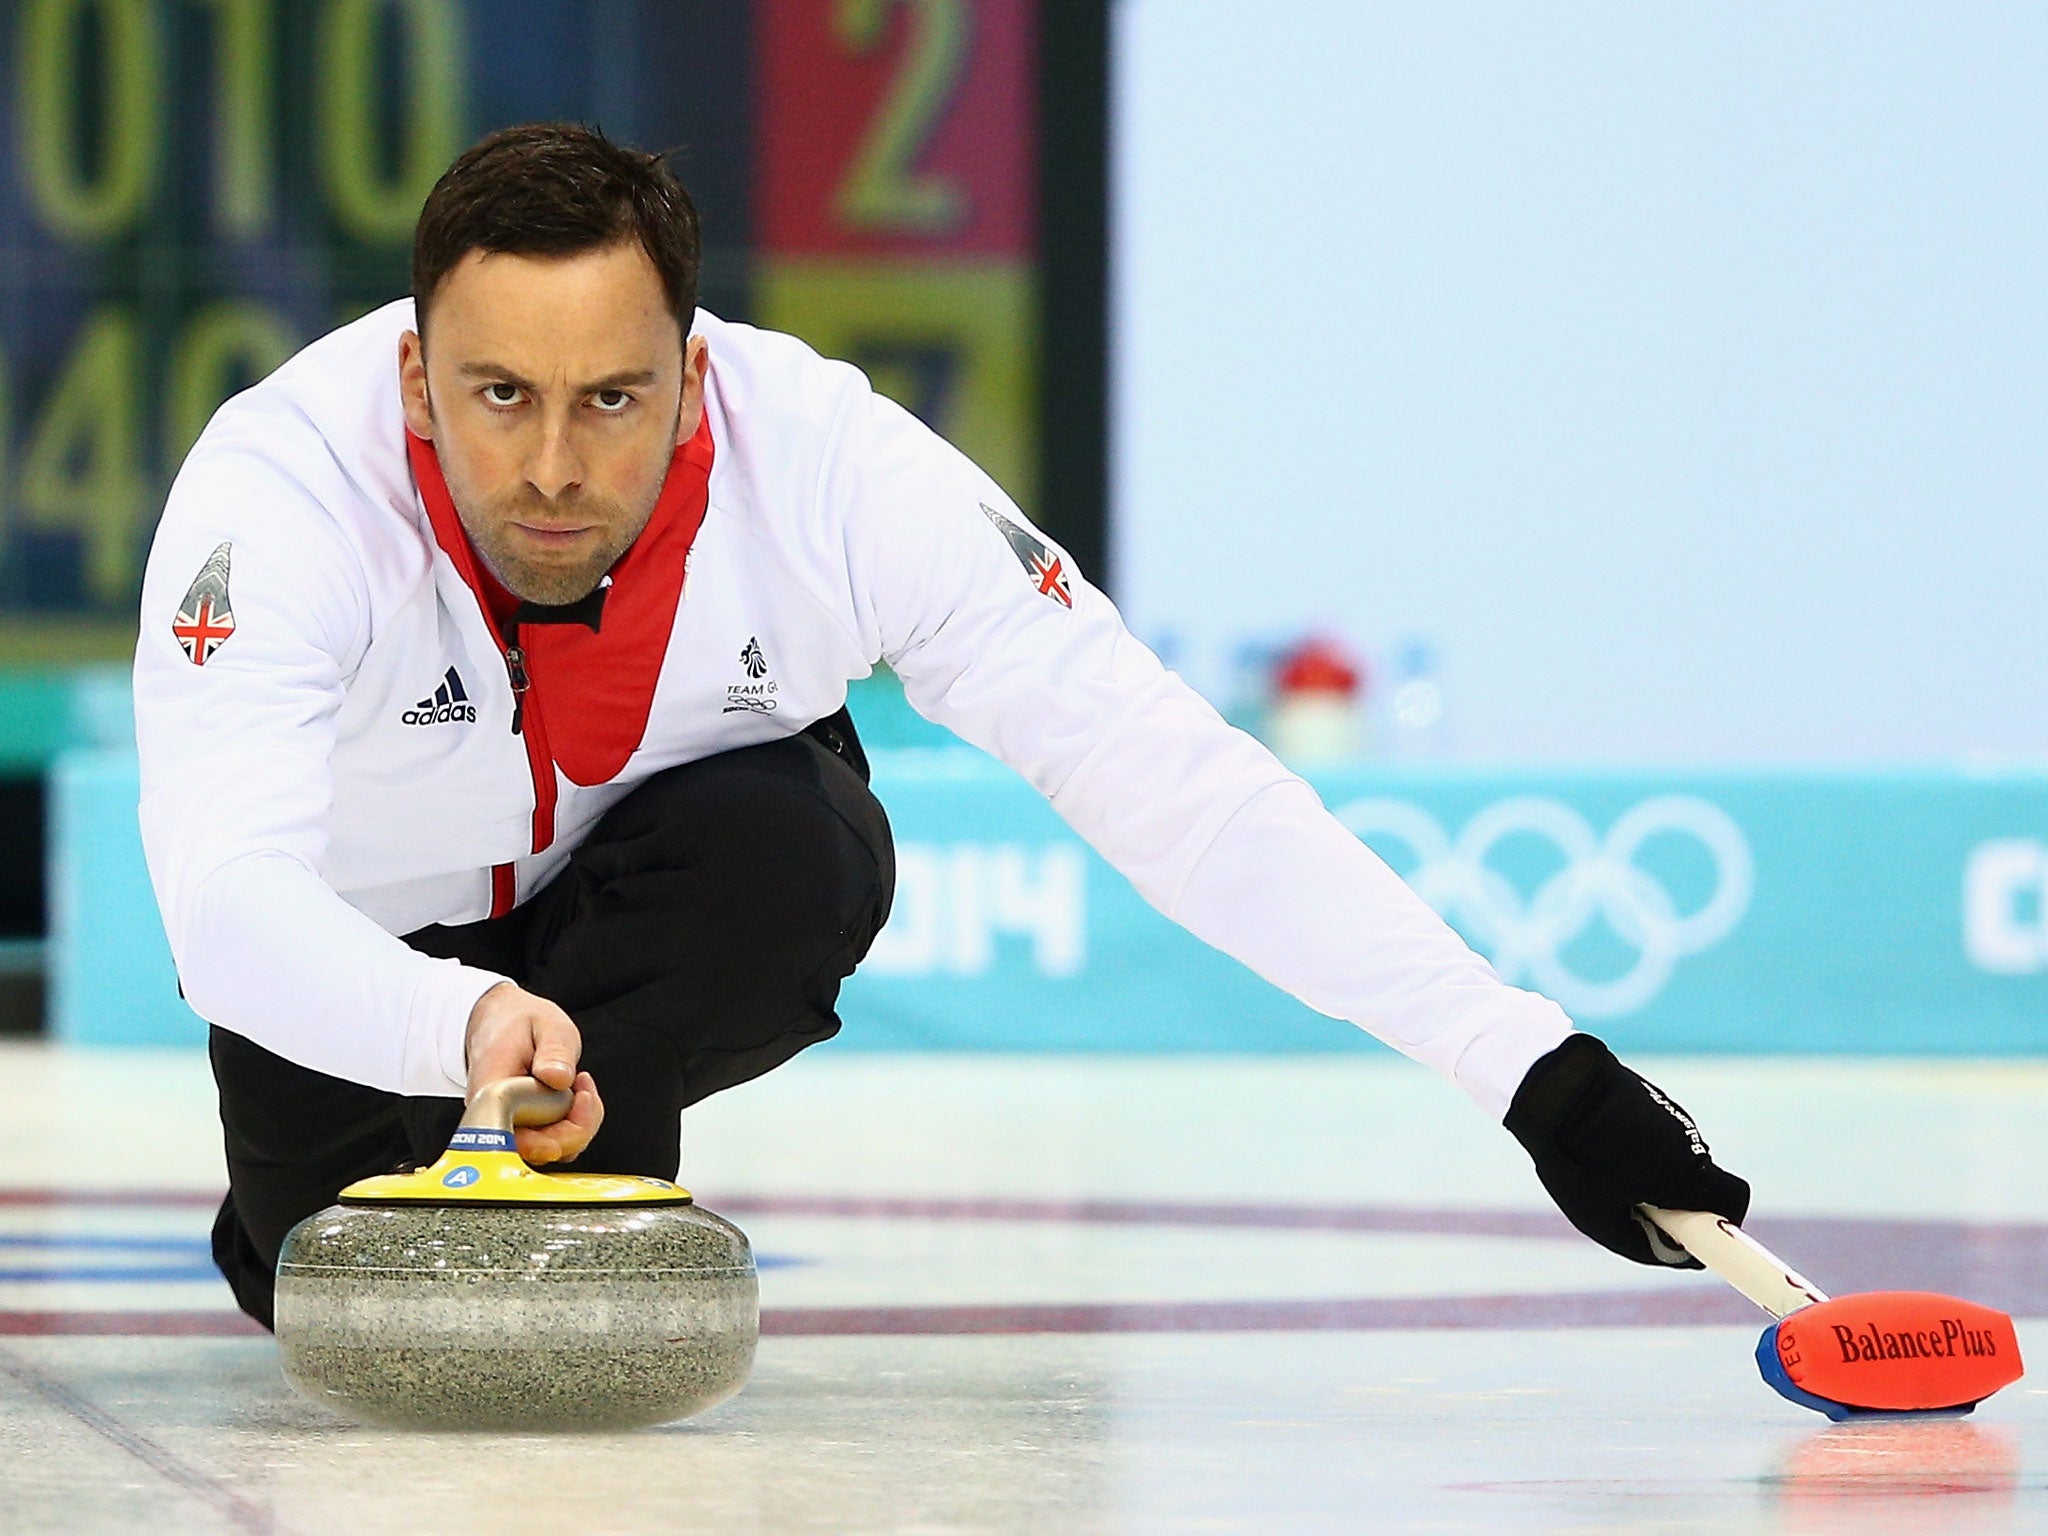 Team GB men's curling captain David Merdoch had a perfect record in his side's 7-4 victory over Russia